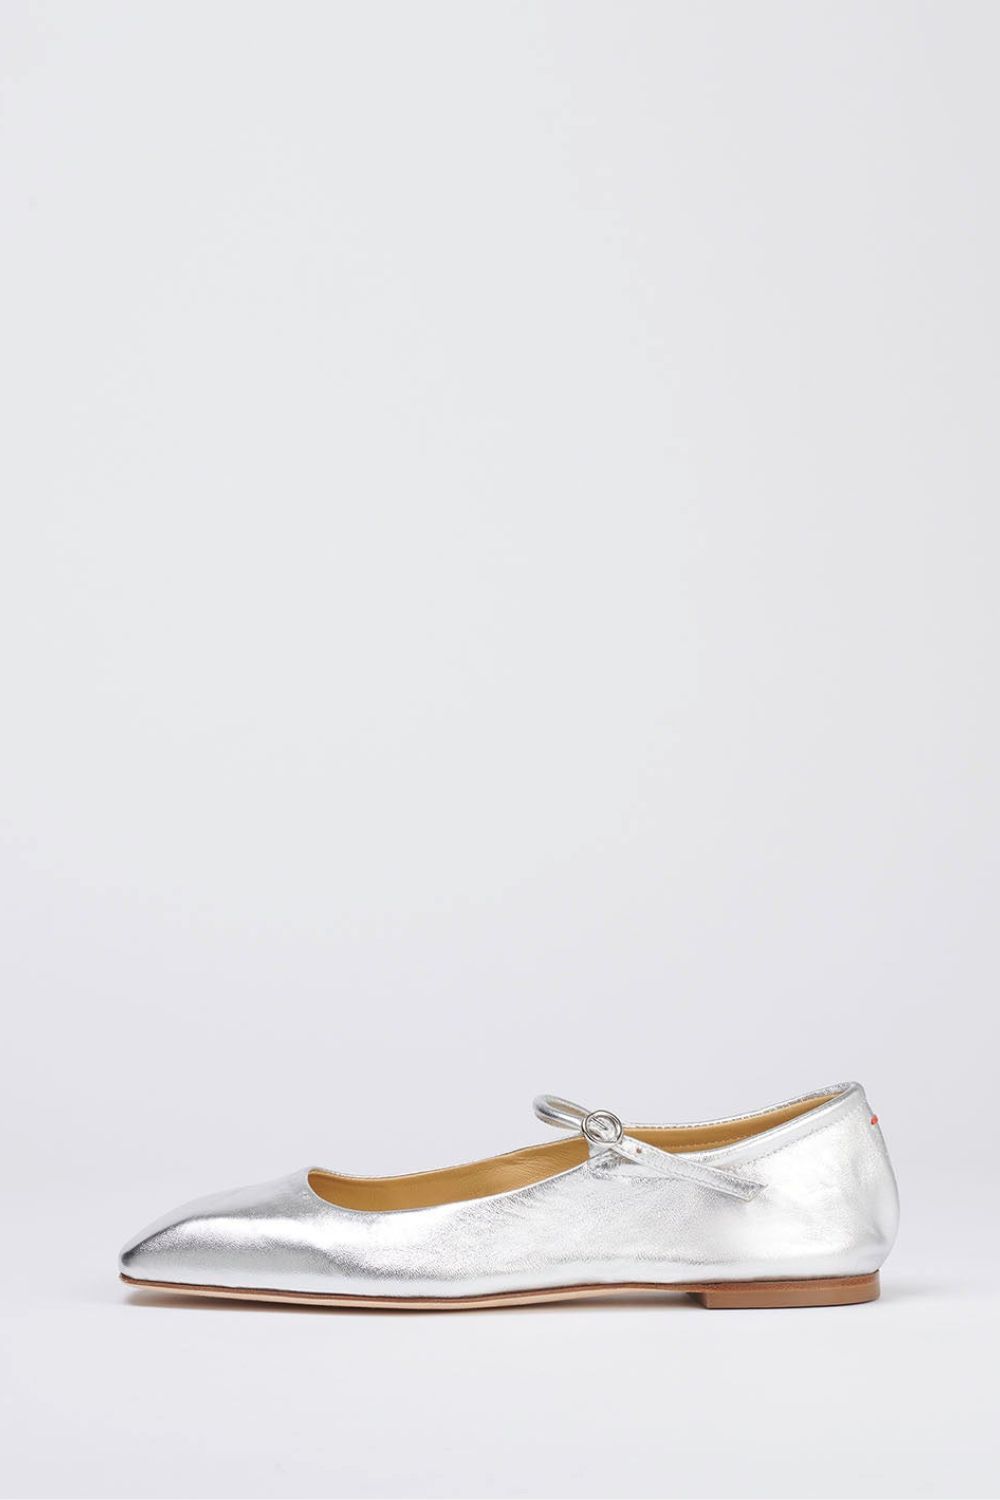 The-Gloss-Magazine-best-party-flats-9